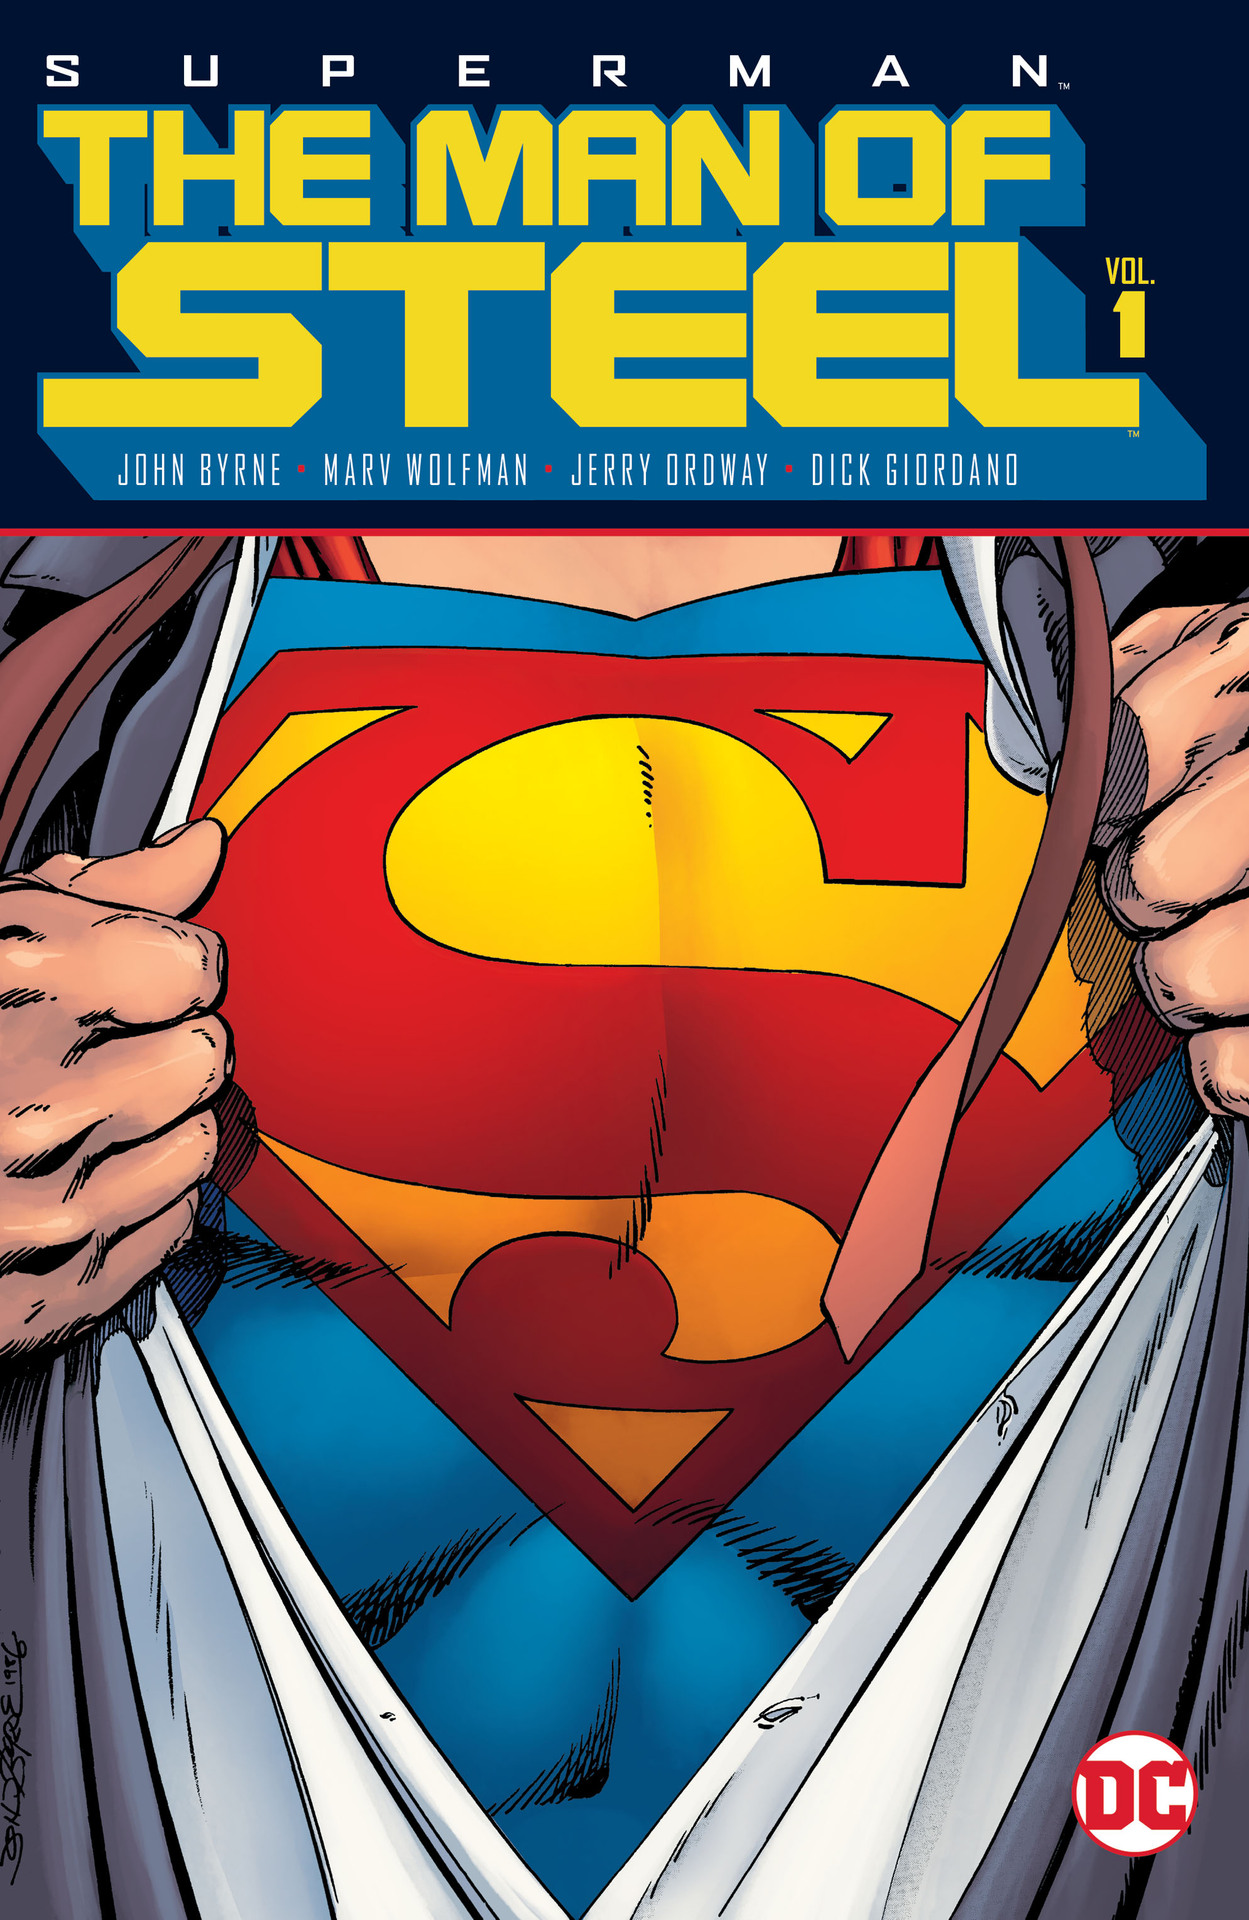 The Man of Steel Vol 1 1, DC Database